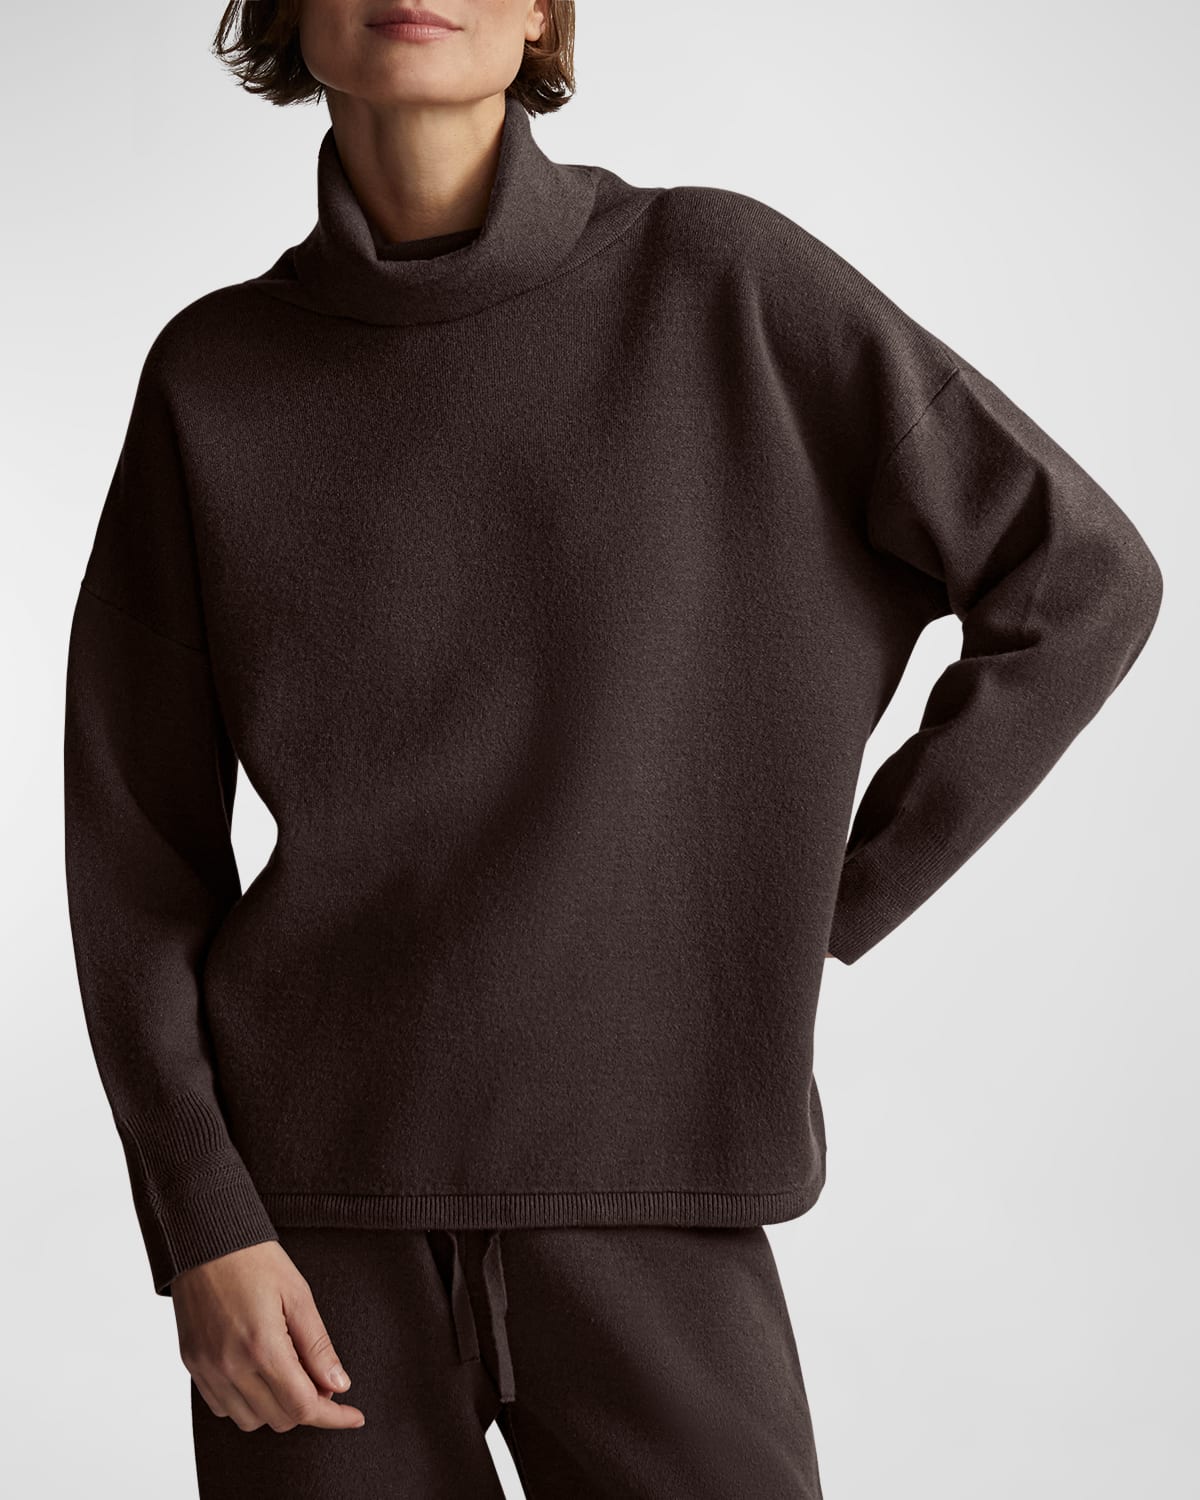 Varley Cavendish Roll-neck Knit Pullover In Coffee Bean